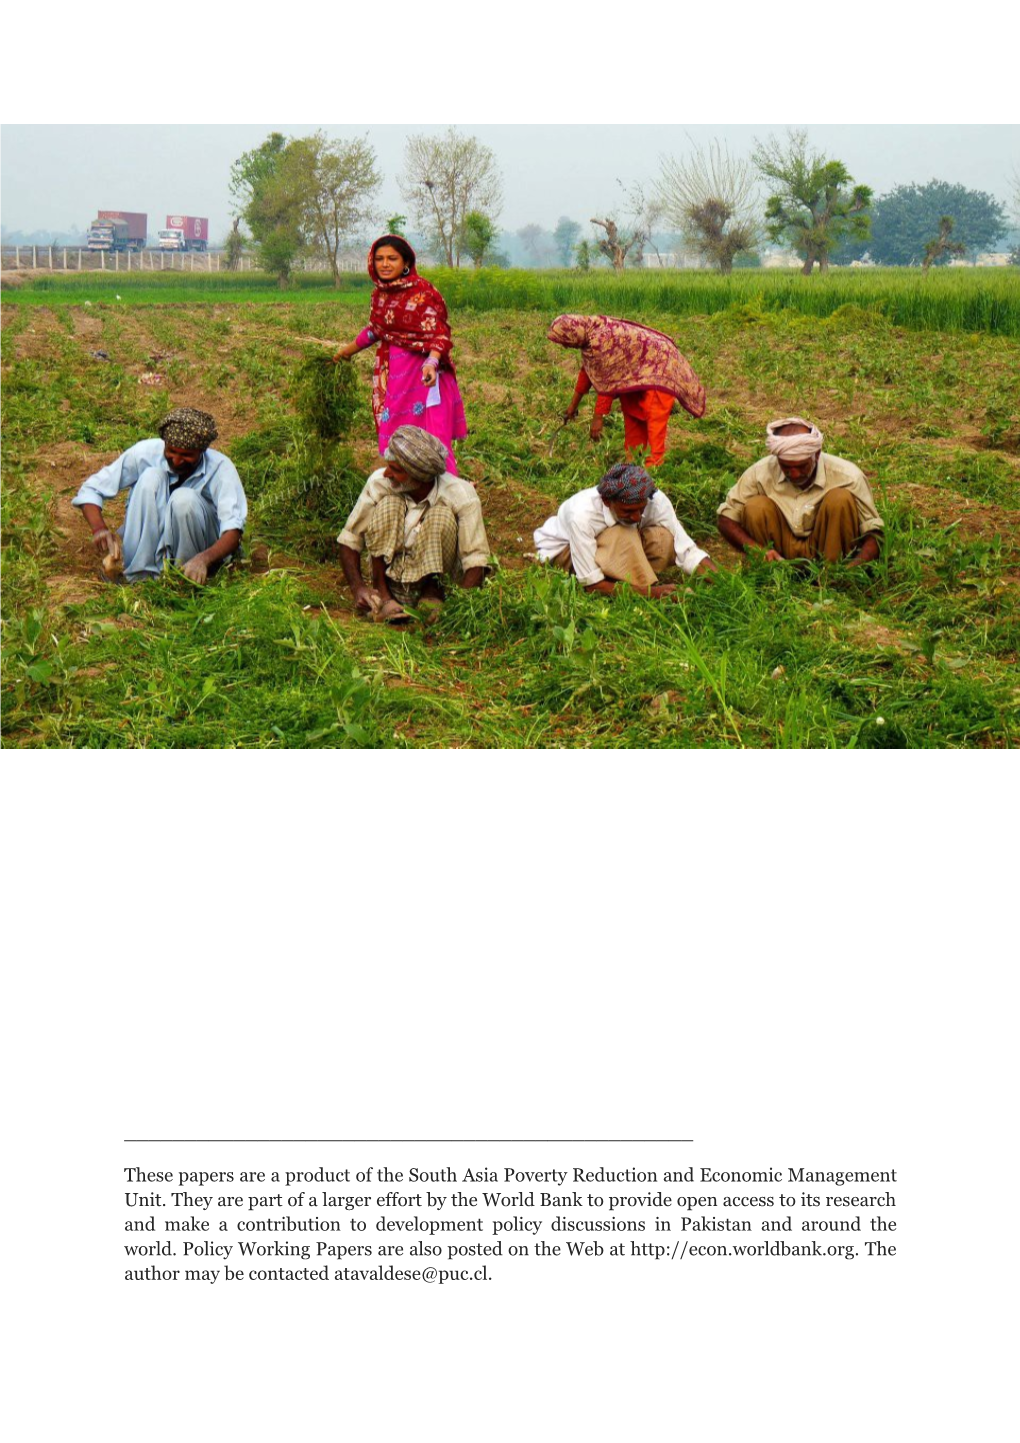 Agriculture Trade and Price Policy in Pakistan